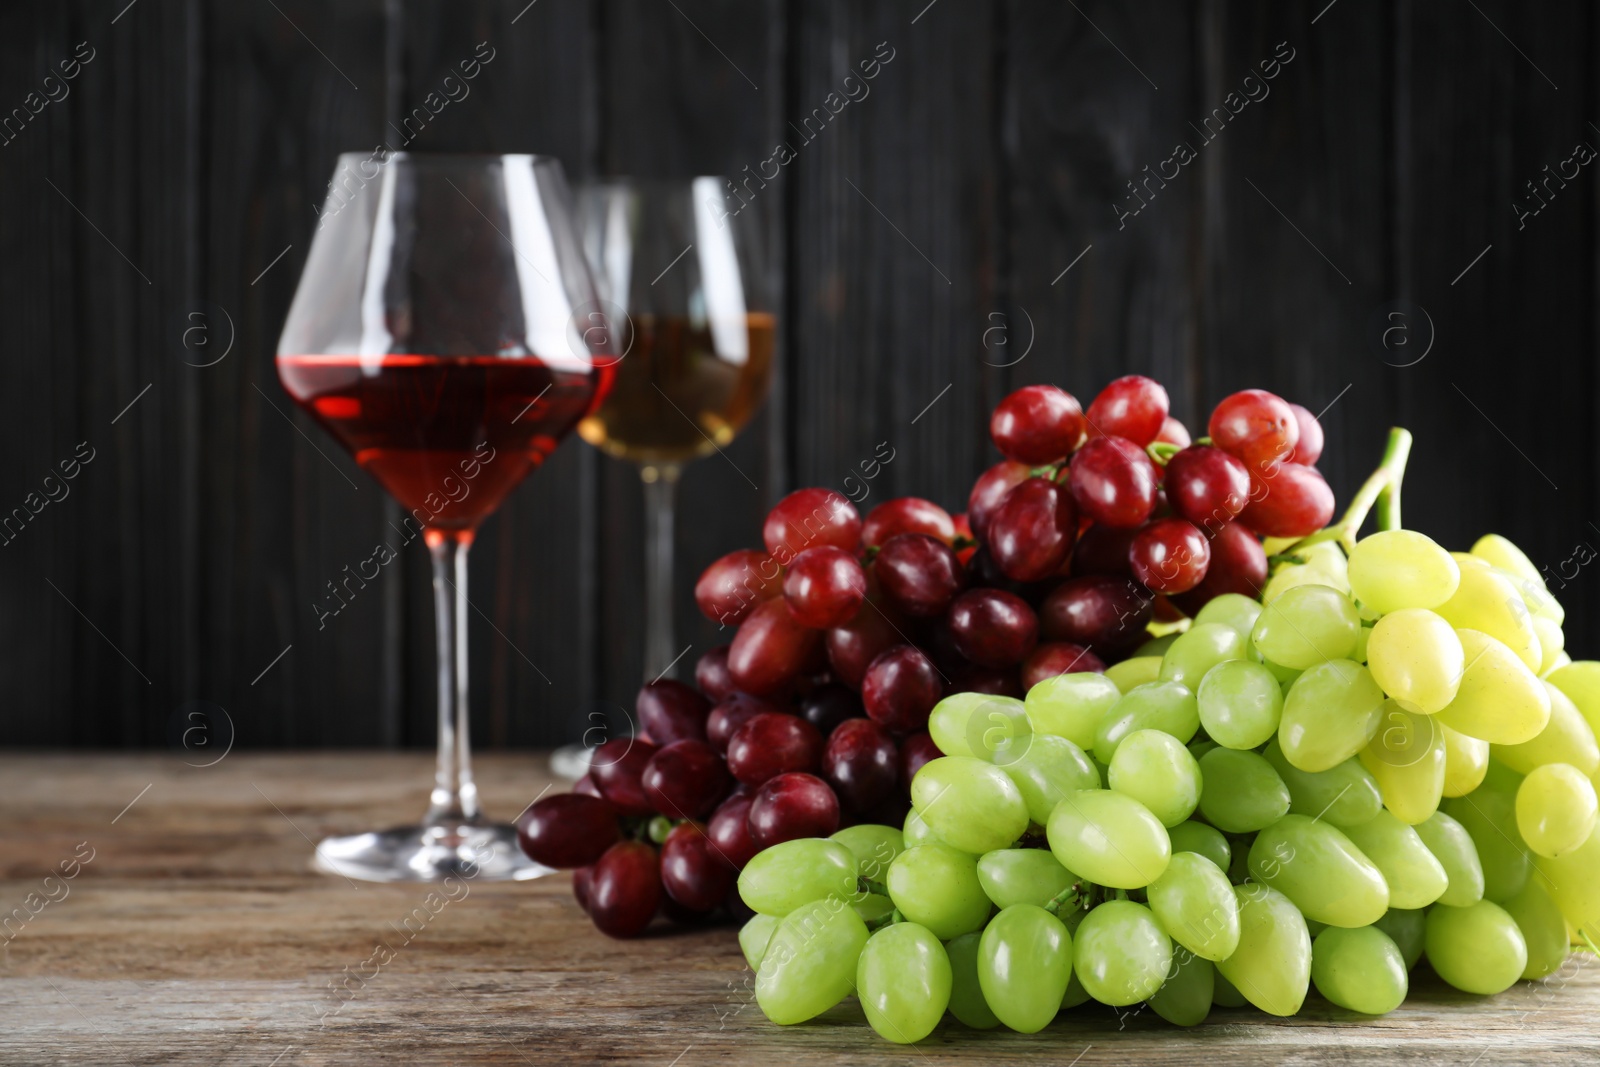 Photo of Fresh ripe juicy grapes and wine on wooden table against dark background